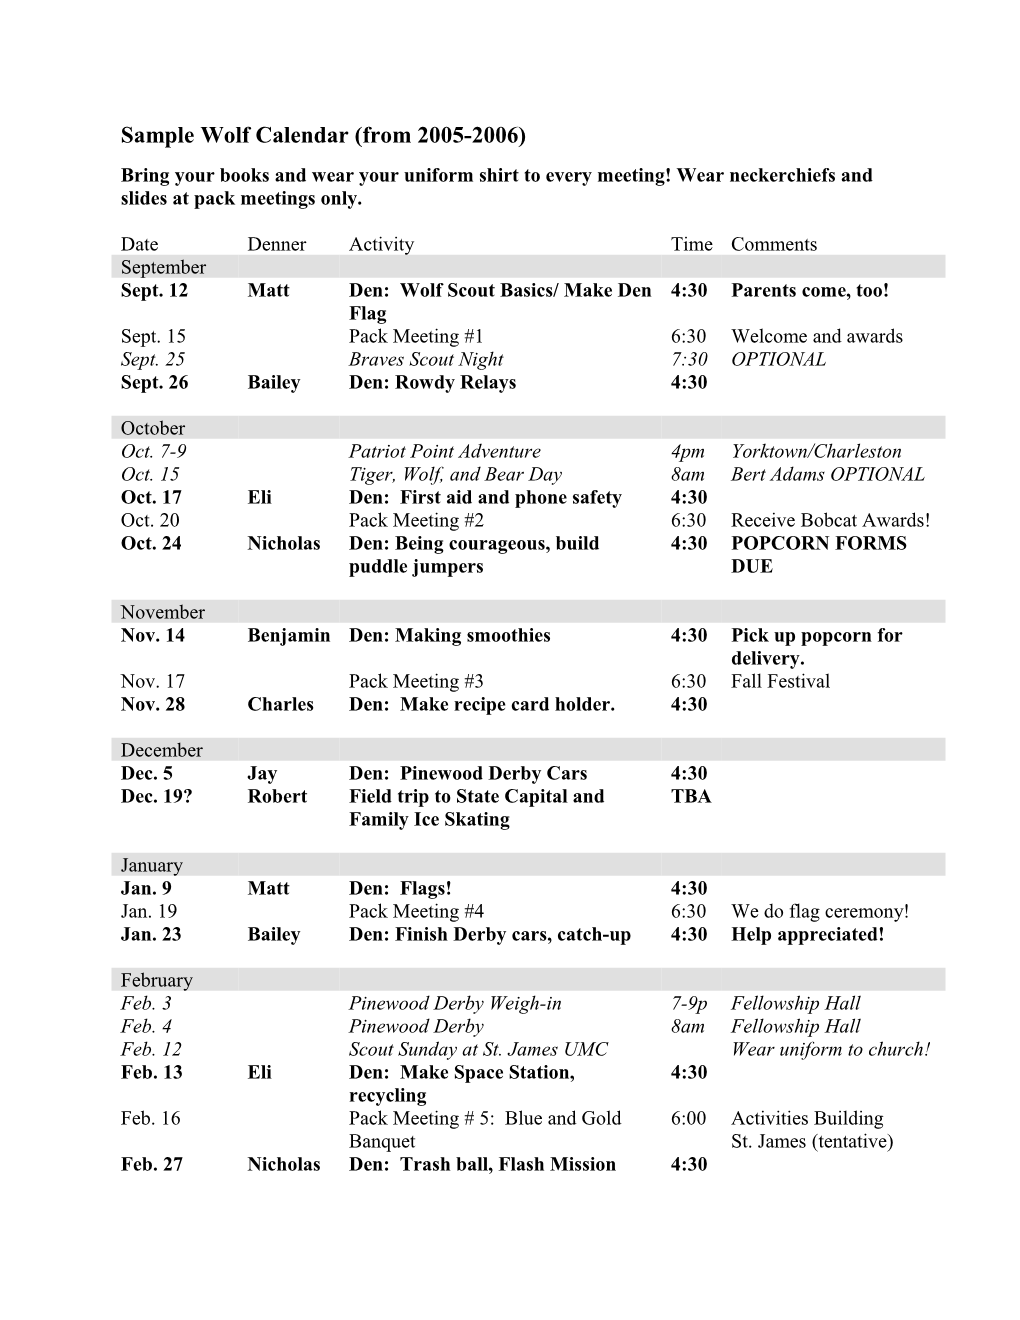 Pack 370 Schedule for 2004-2005